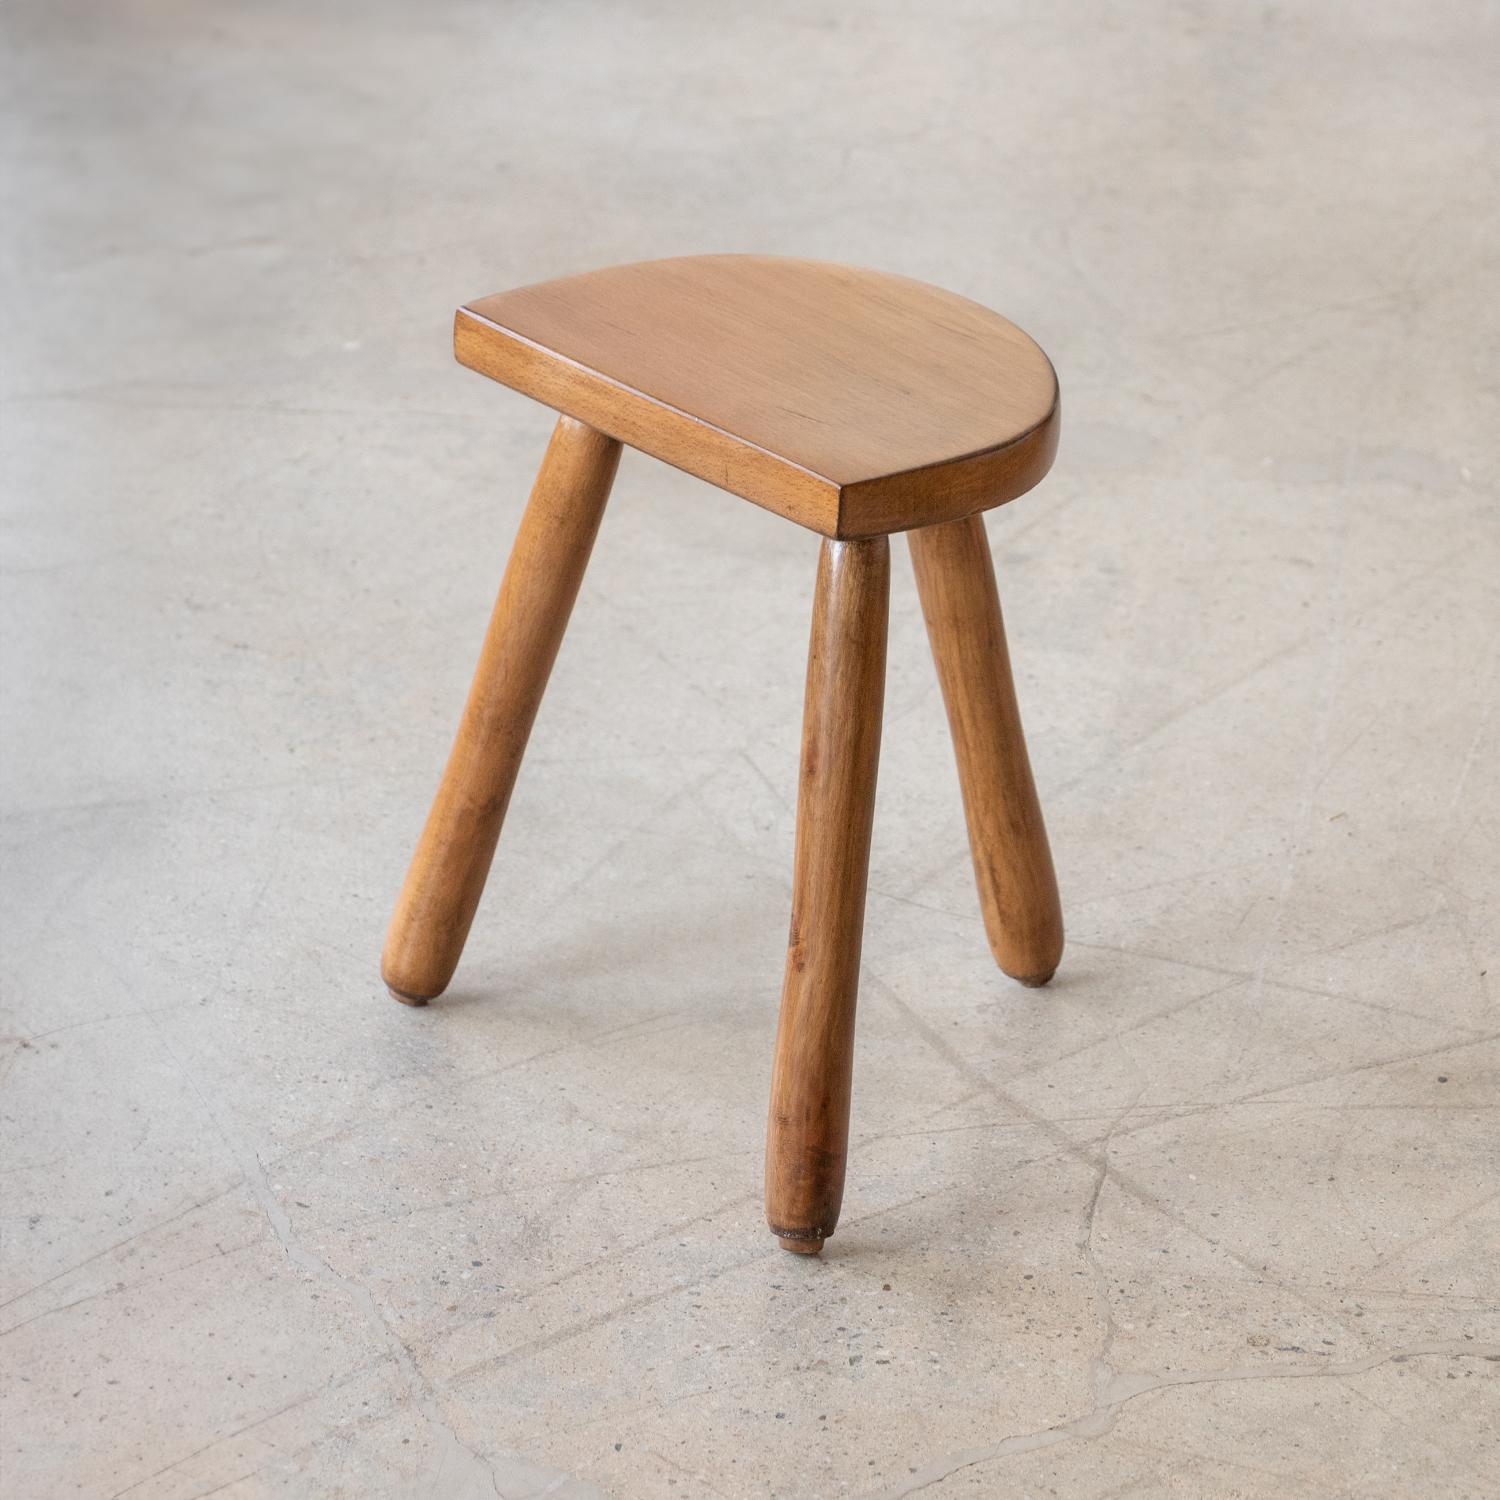 Vintage short wood stool with semi-circle seat and smooth wood legs from France. Newly refinished. Can be used as stool or as side table next to chairs. 



